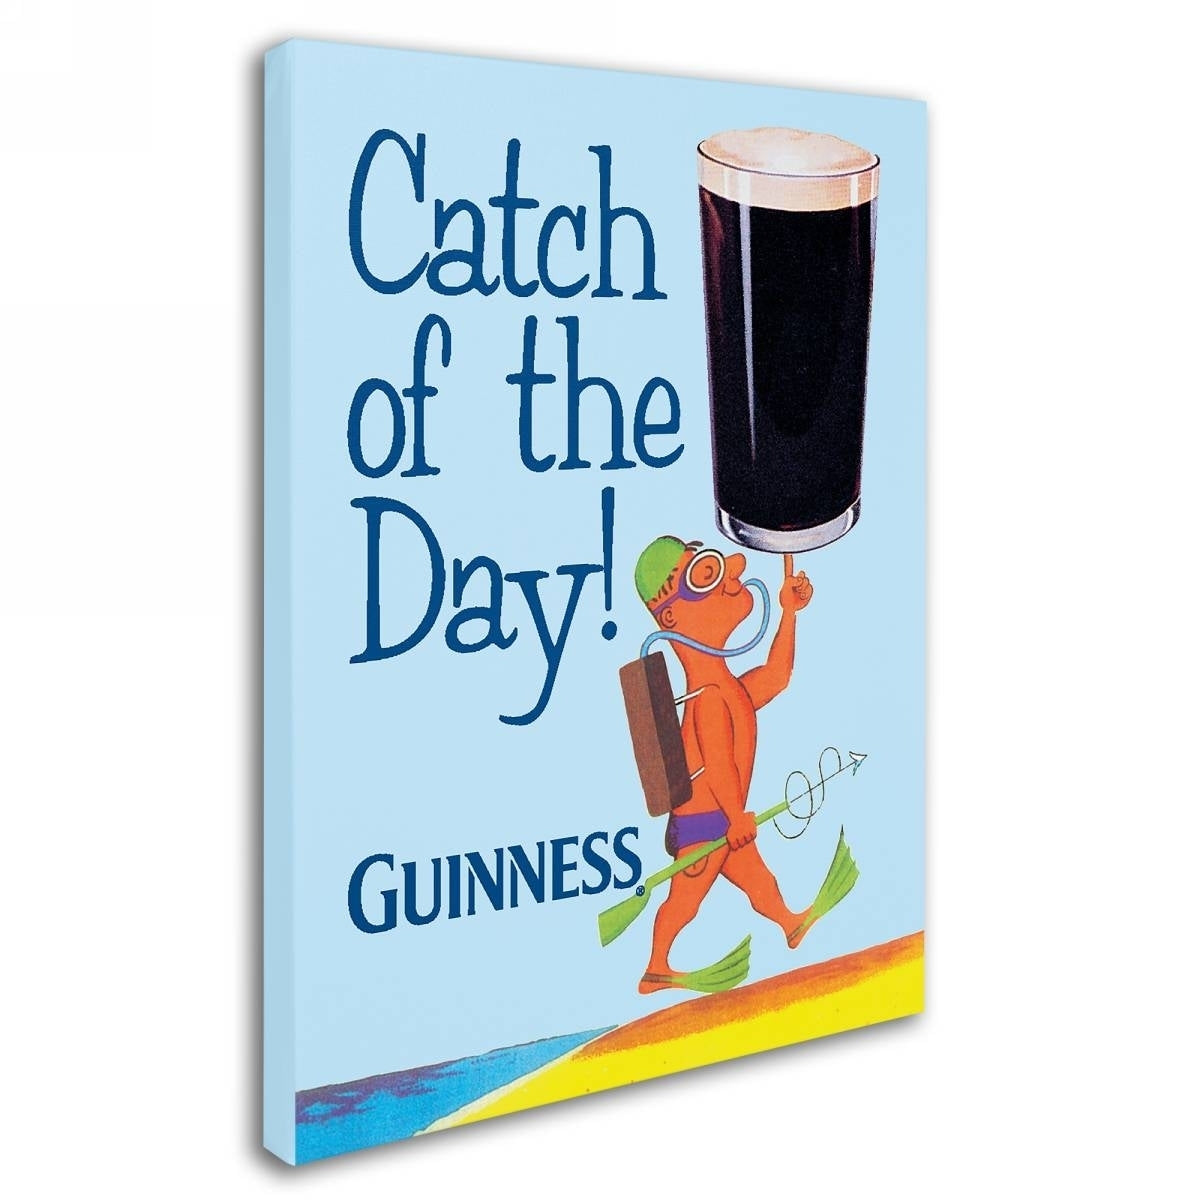 Catch of the day Guinness canvas print featuring beer at the beach is now the Guinness Brewery 'Catch Of The Day' Canvas Art, produced by Guinness.